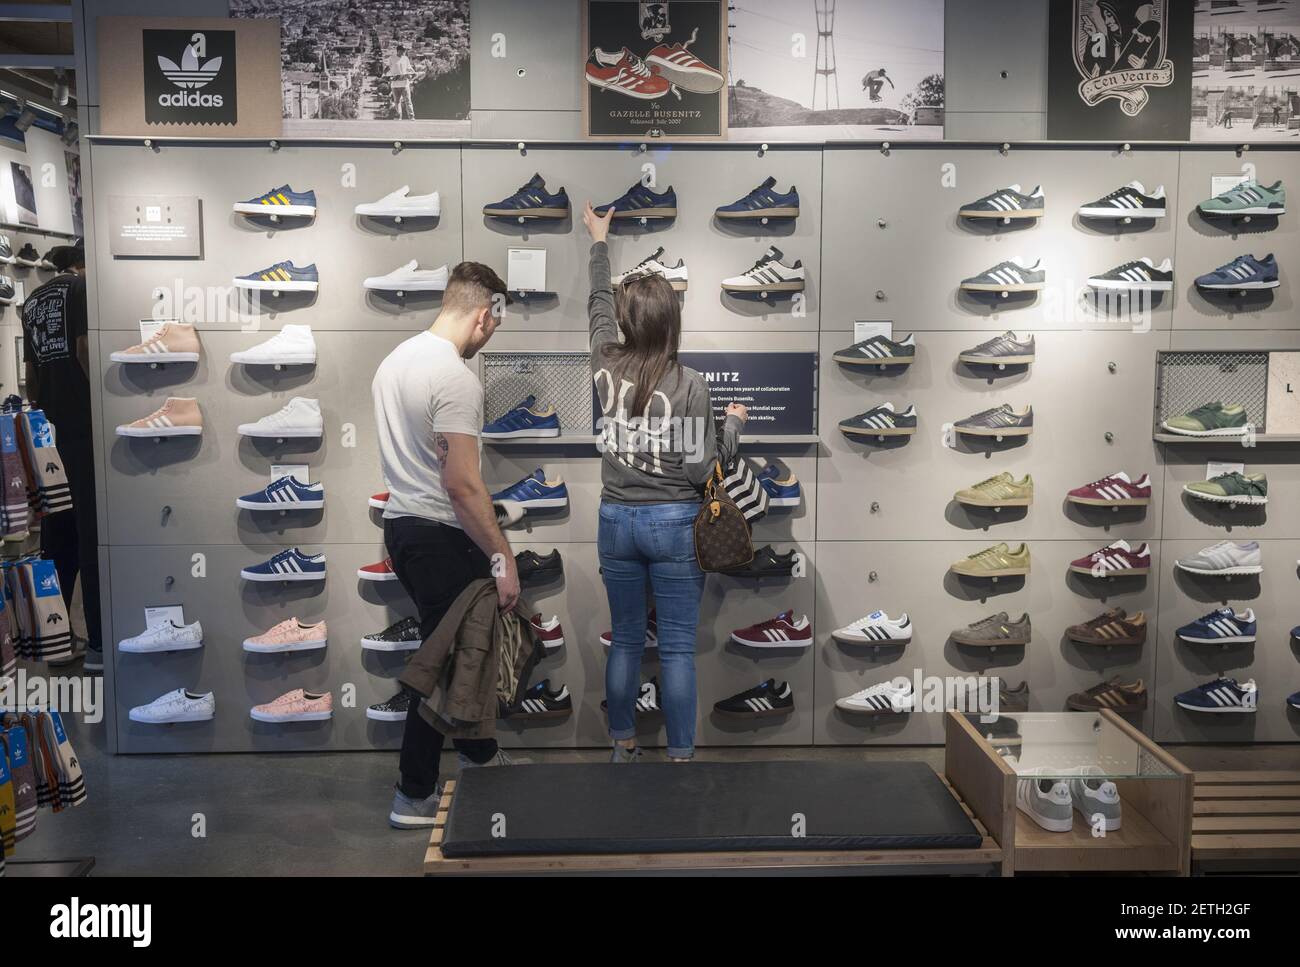 Adidas shoes in the flagship Adidas store in New York City, USA Stock Photo  - Alamy